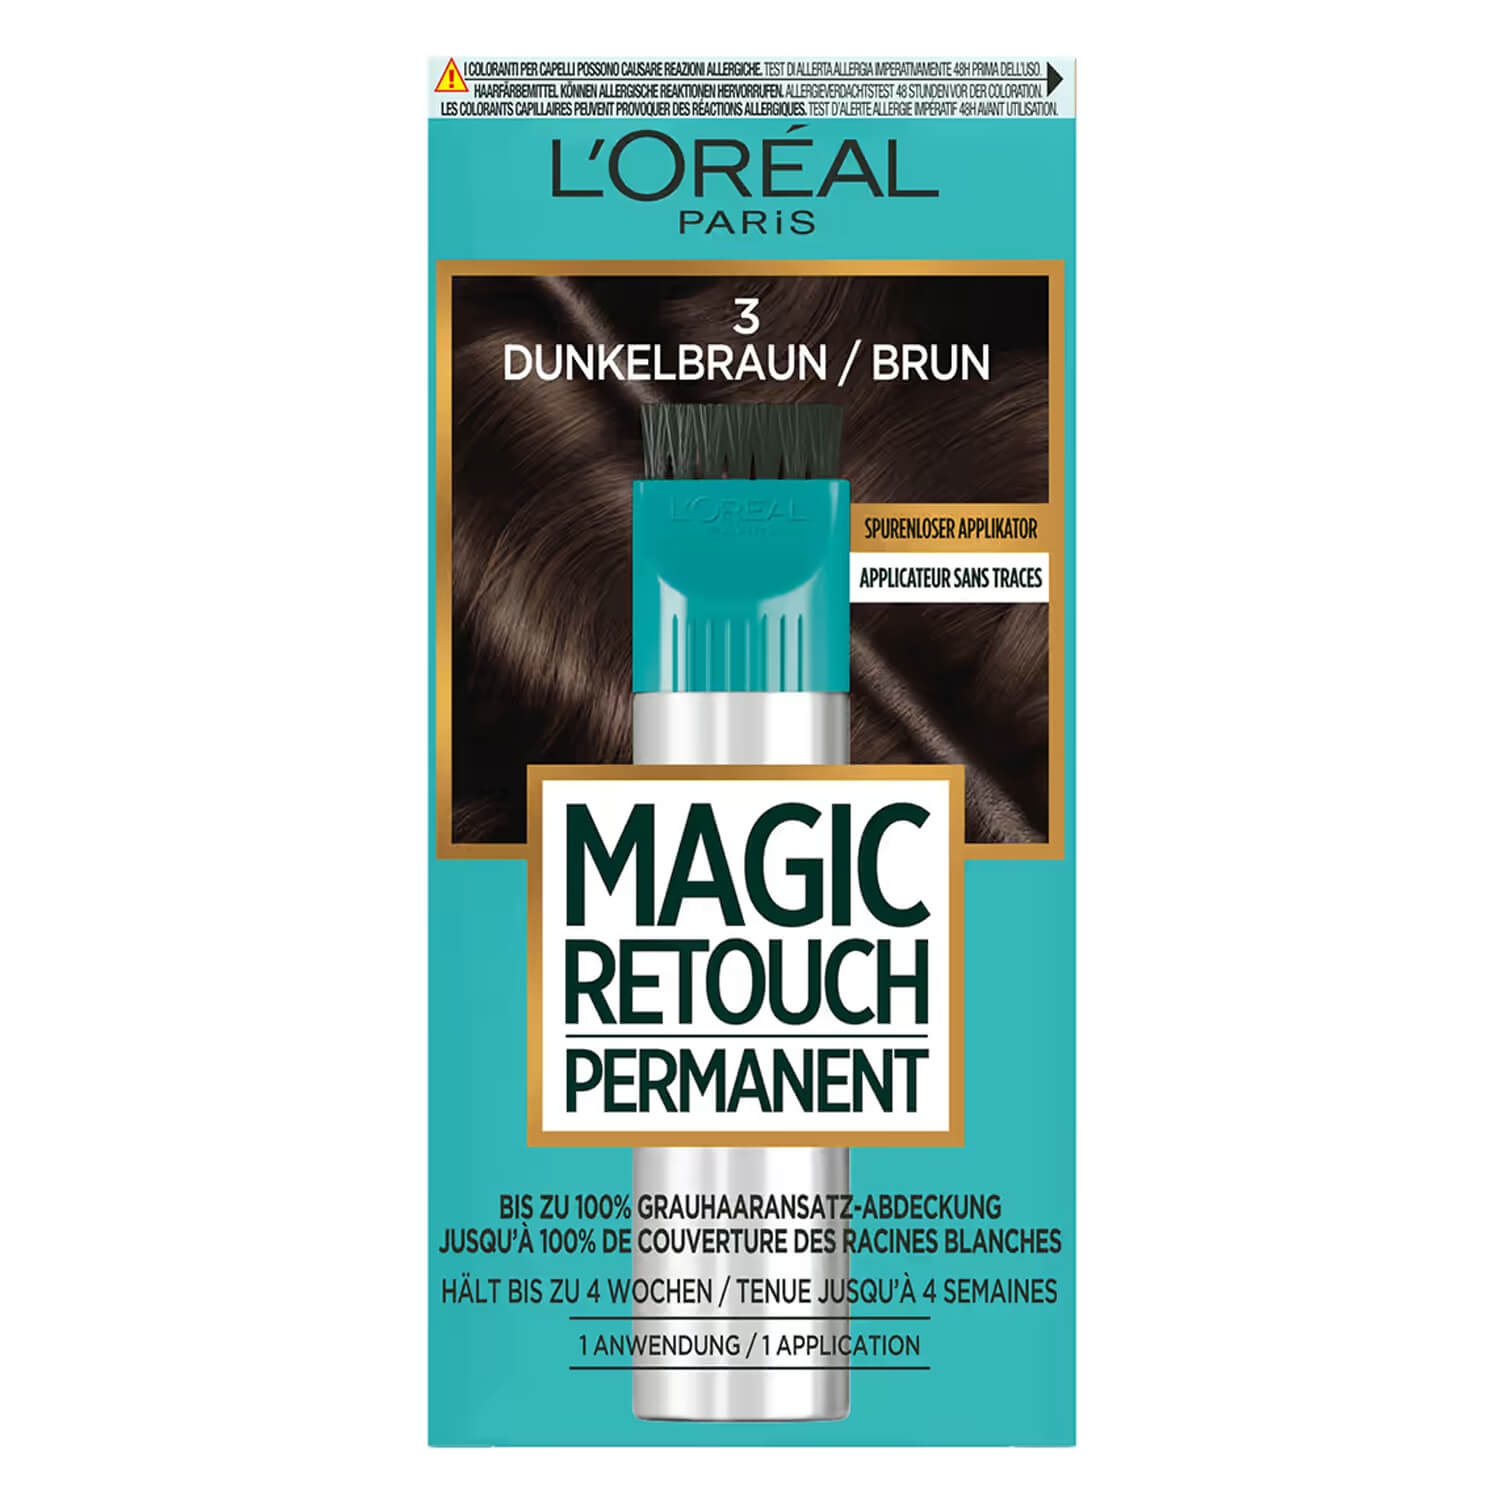 Product image from LOréal Magic Retouch - Permanent Dunkelbraun